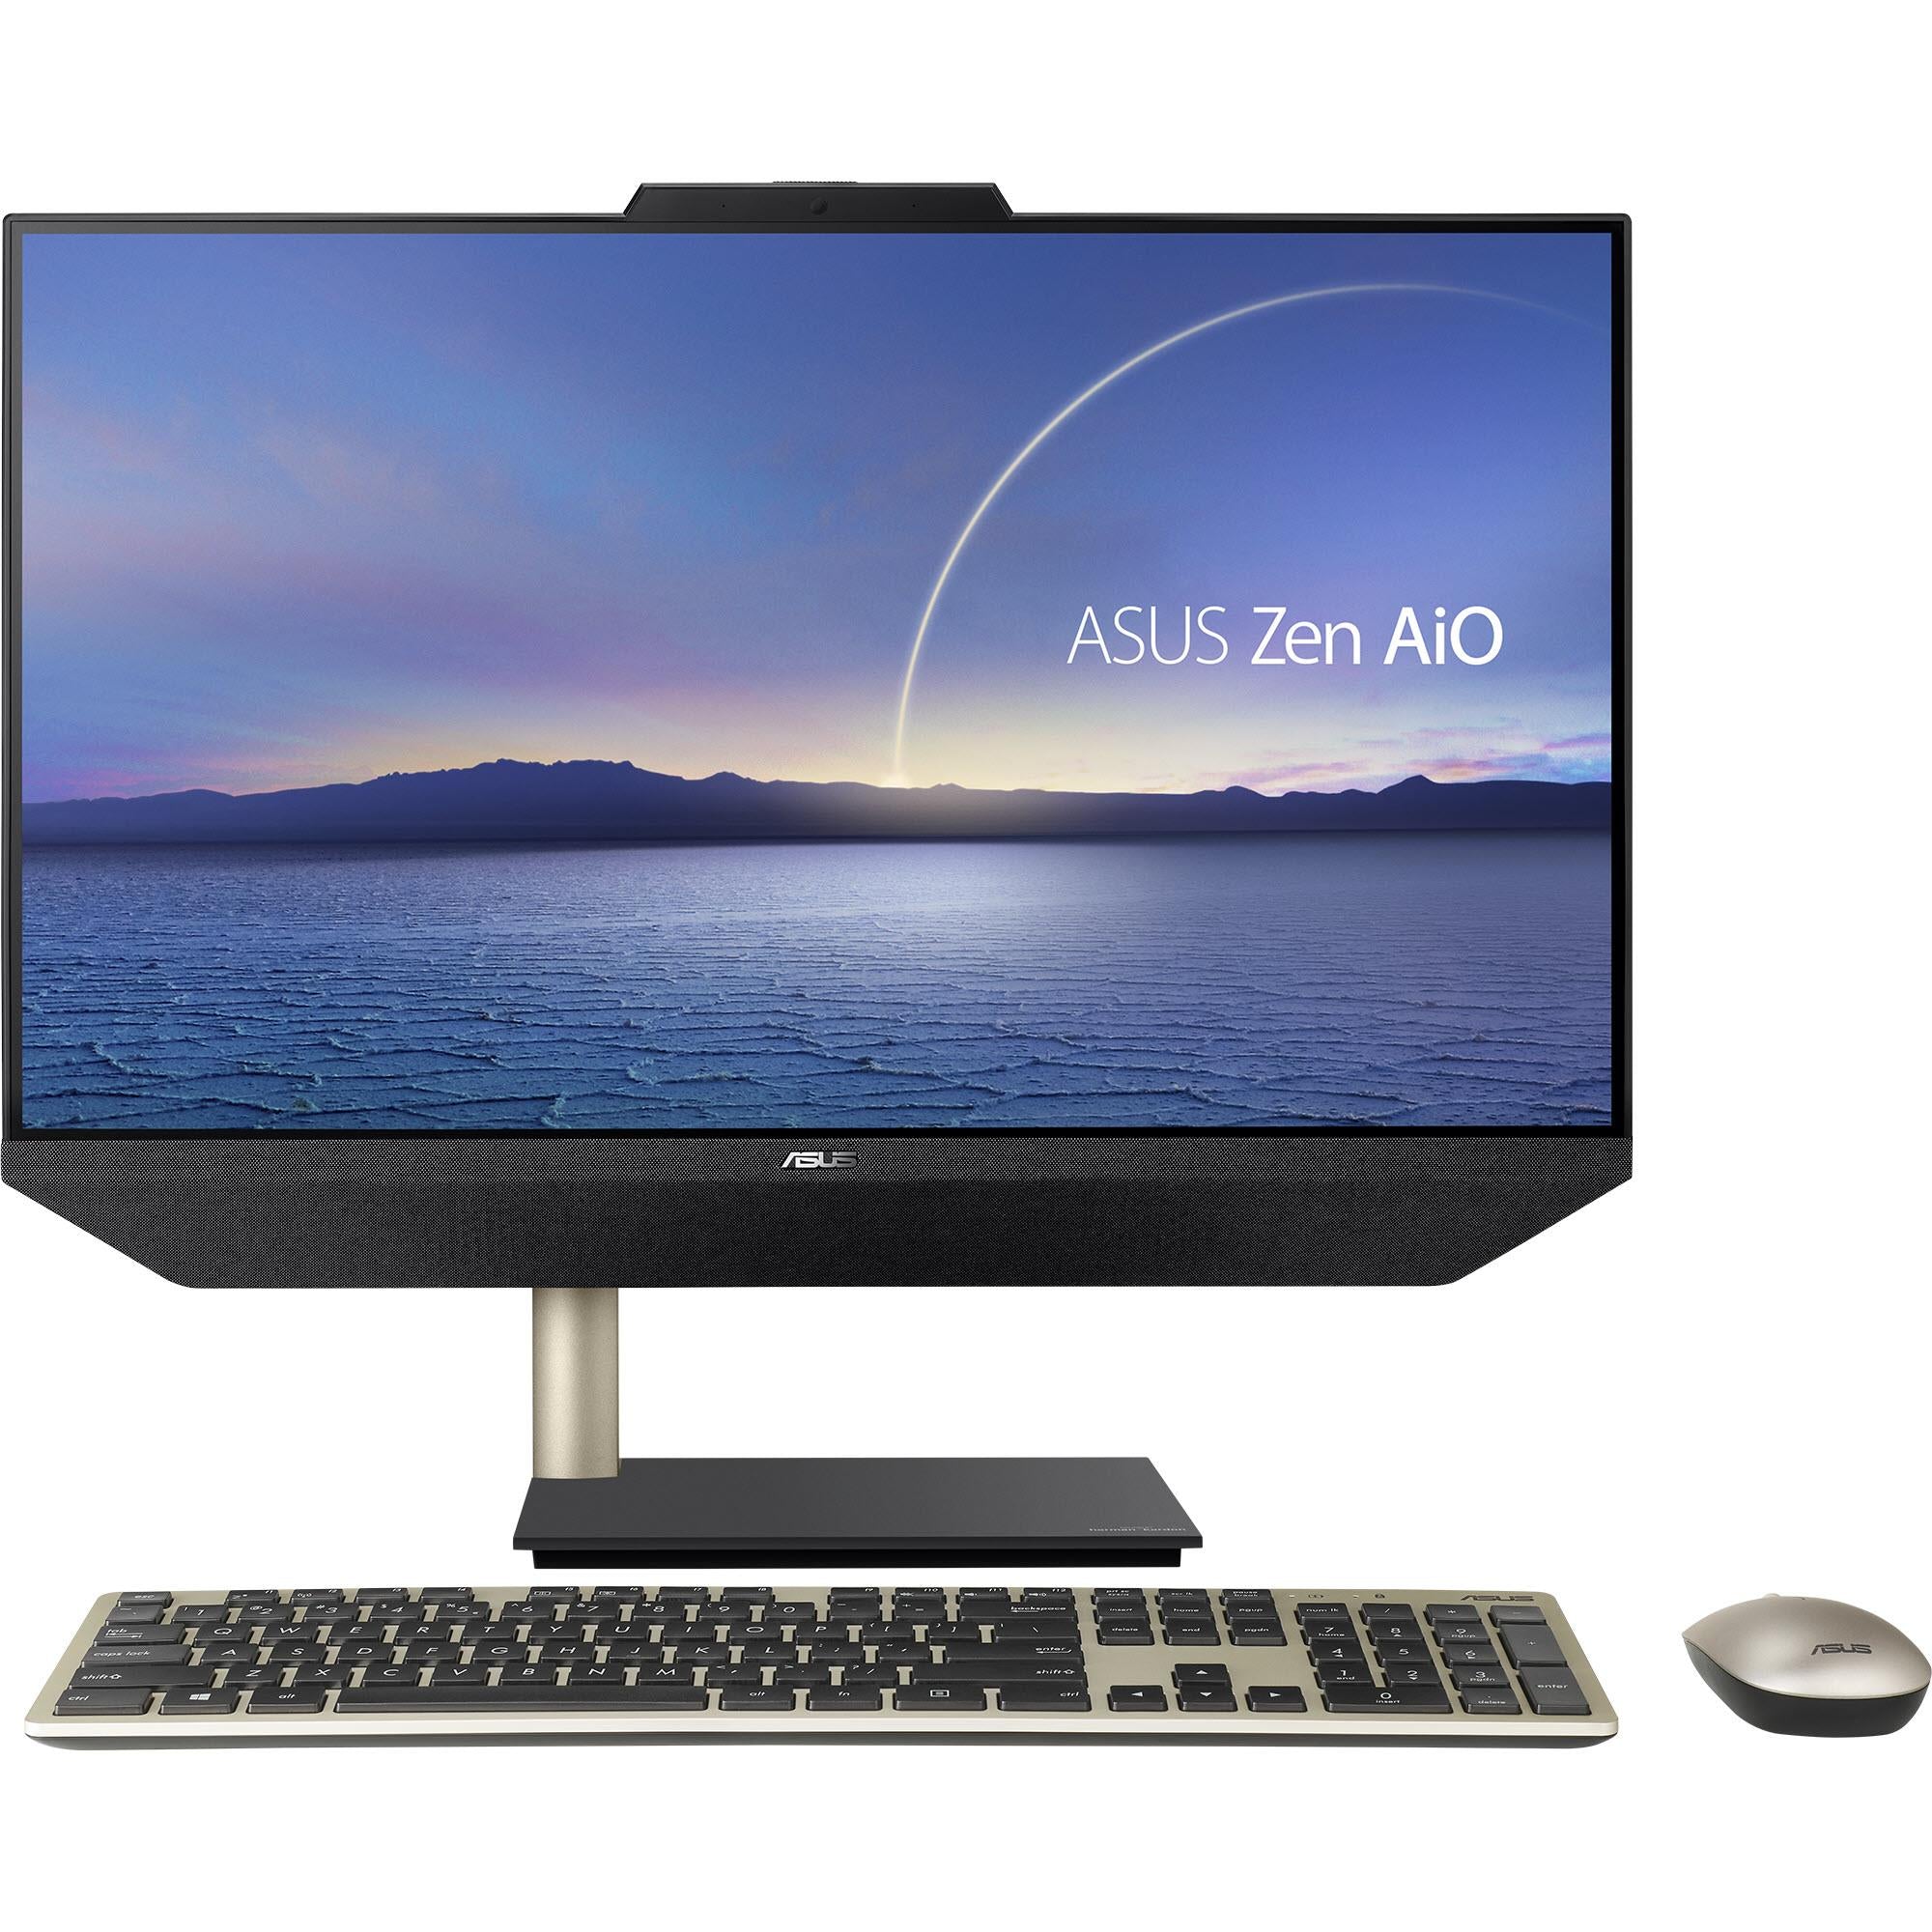 asus zen 23.8" fhd all-in-one pc (512gb) [intel i5]